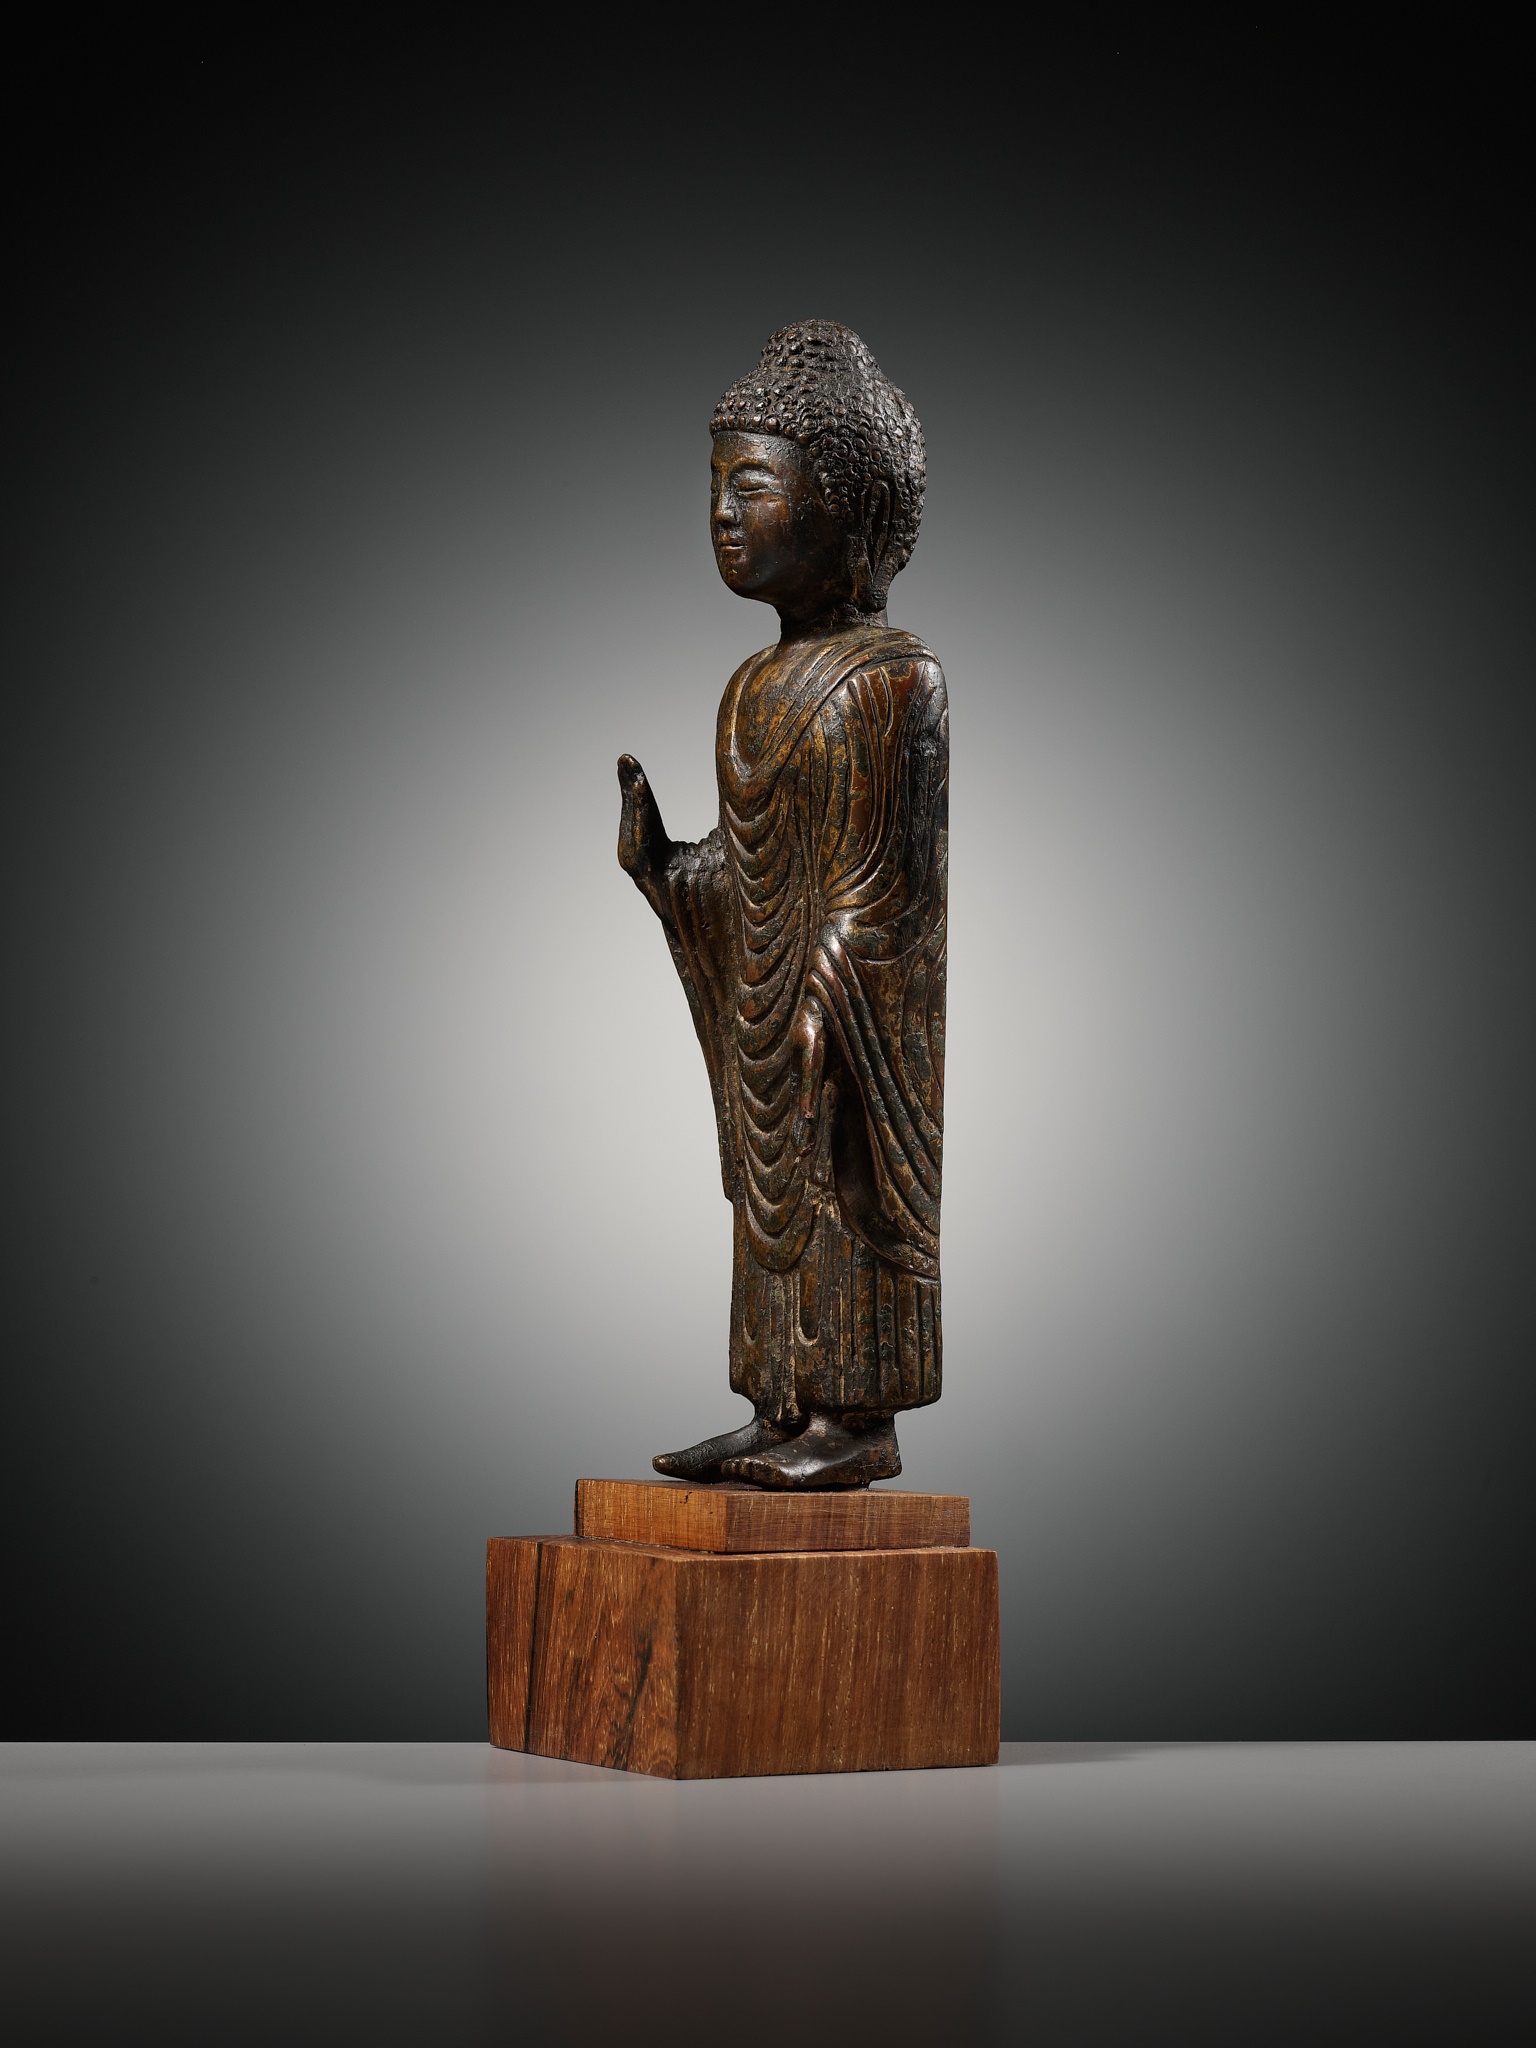 A GILT-BRONZE STANDING FIGURE OF BUDDHA, UNIFIED SILLA DYNASTY, KOREA, 8TH - 9TH CENTURY - Image 8 of 12